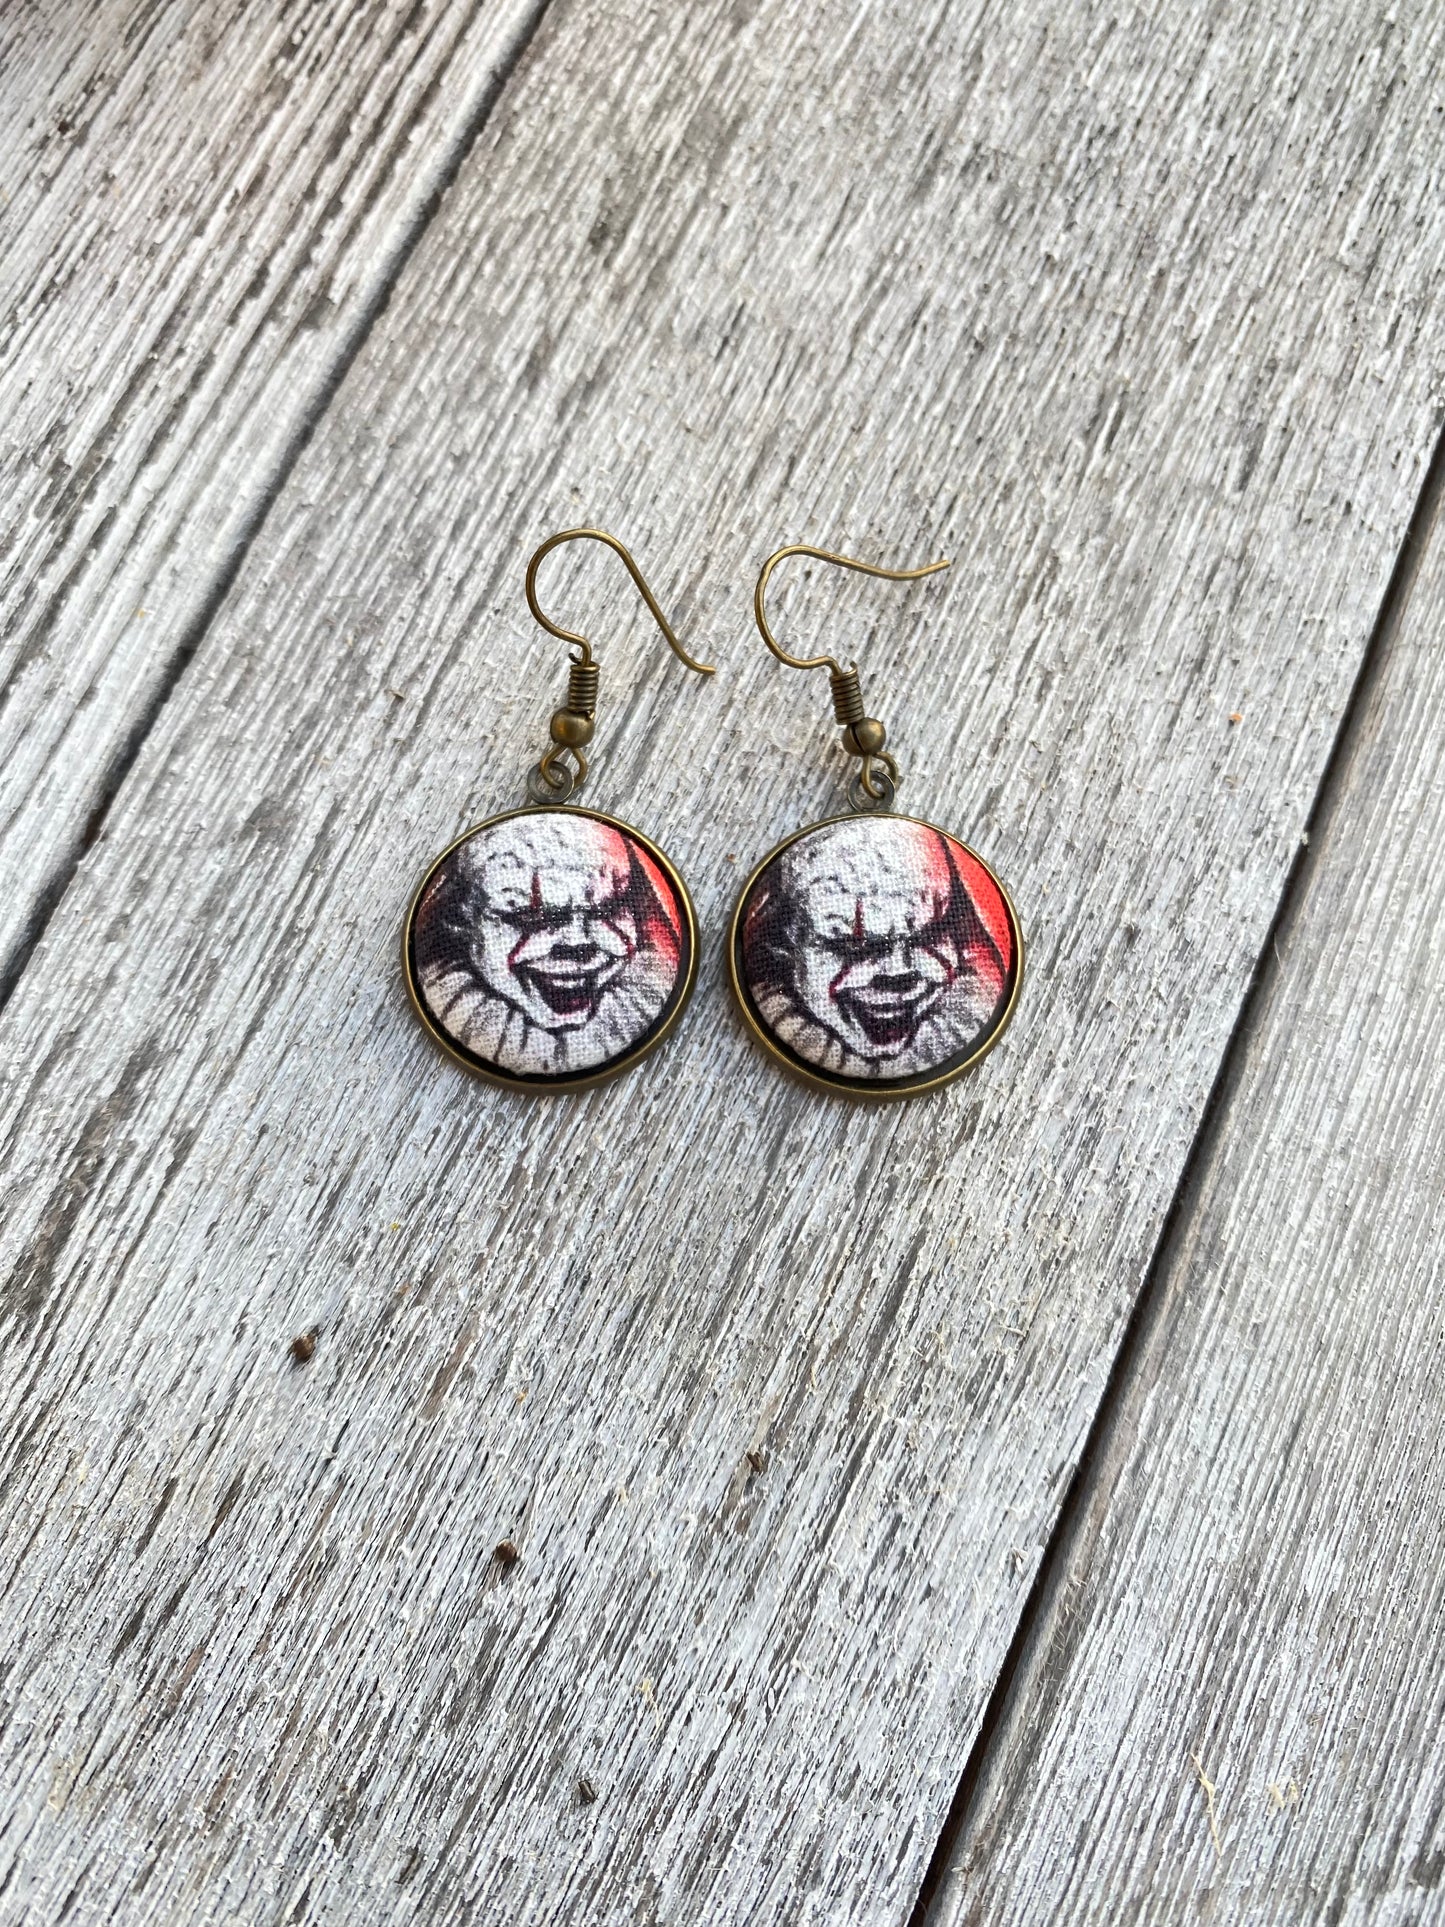 It Pennywise Scary Movie Dange Earrings Novelty Gift Scary Clown